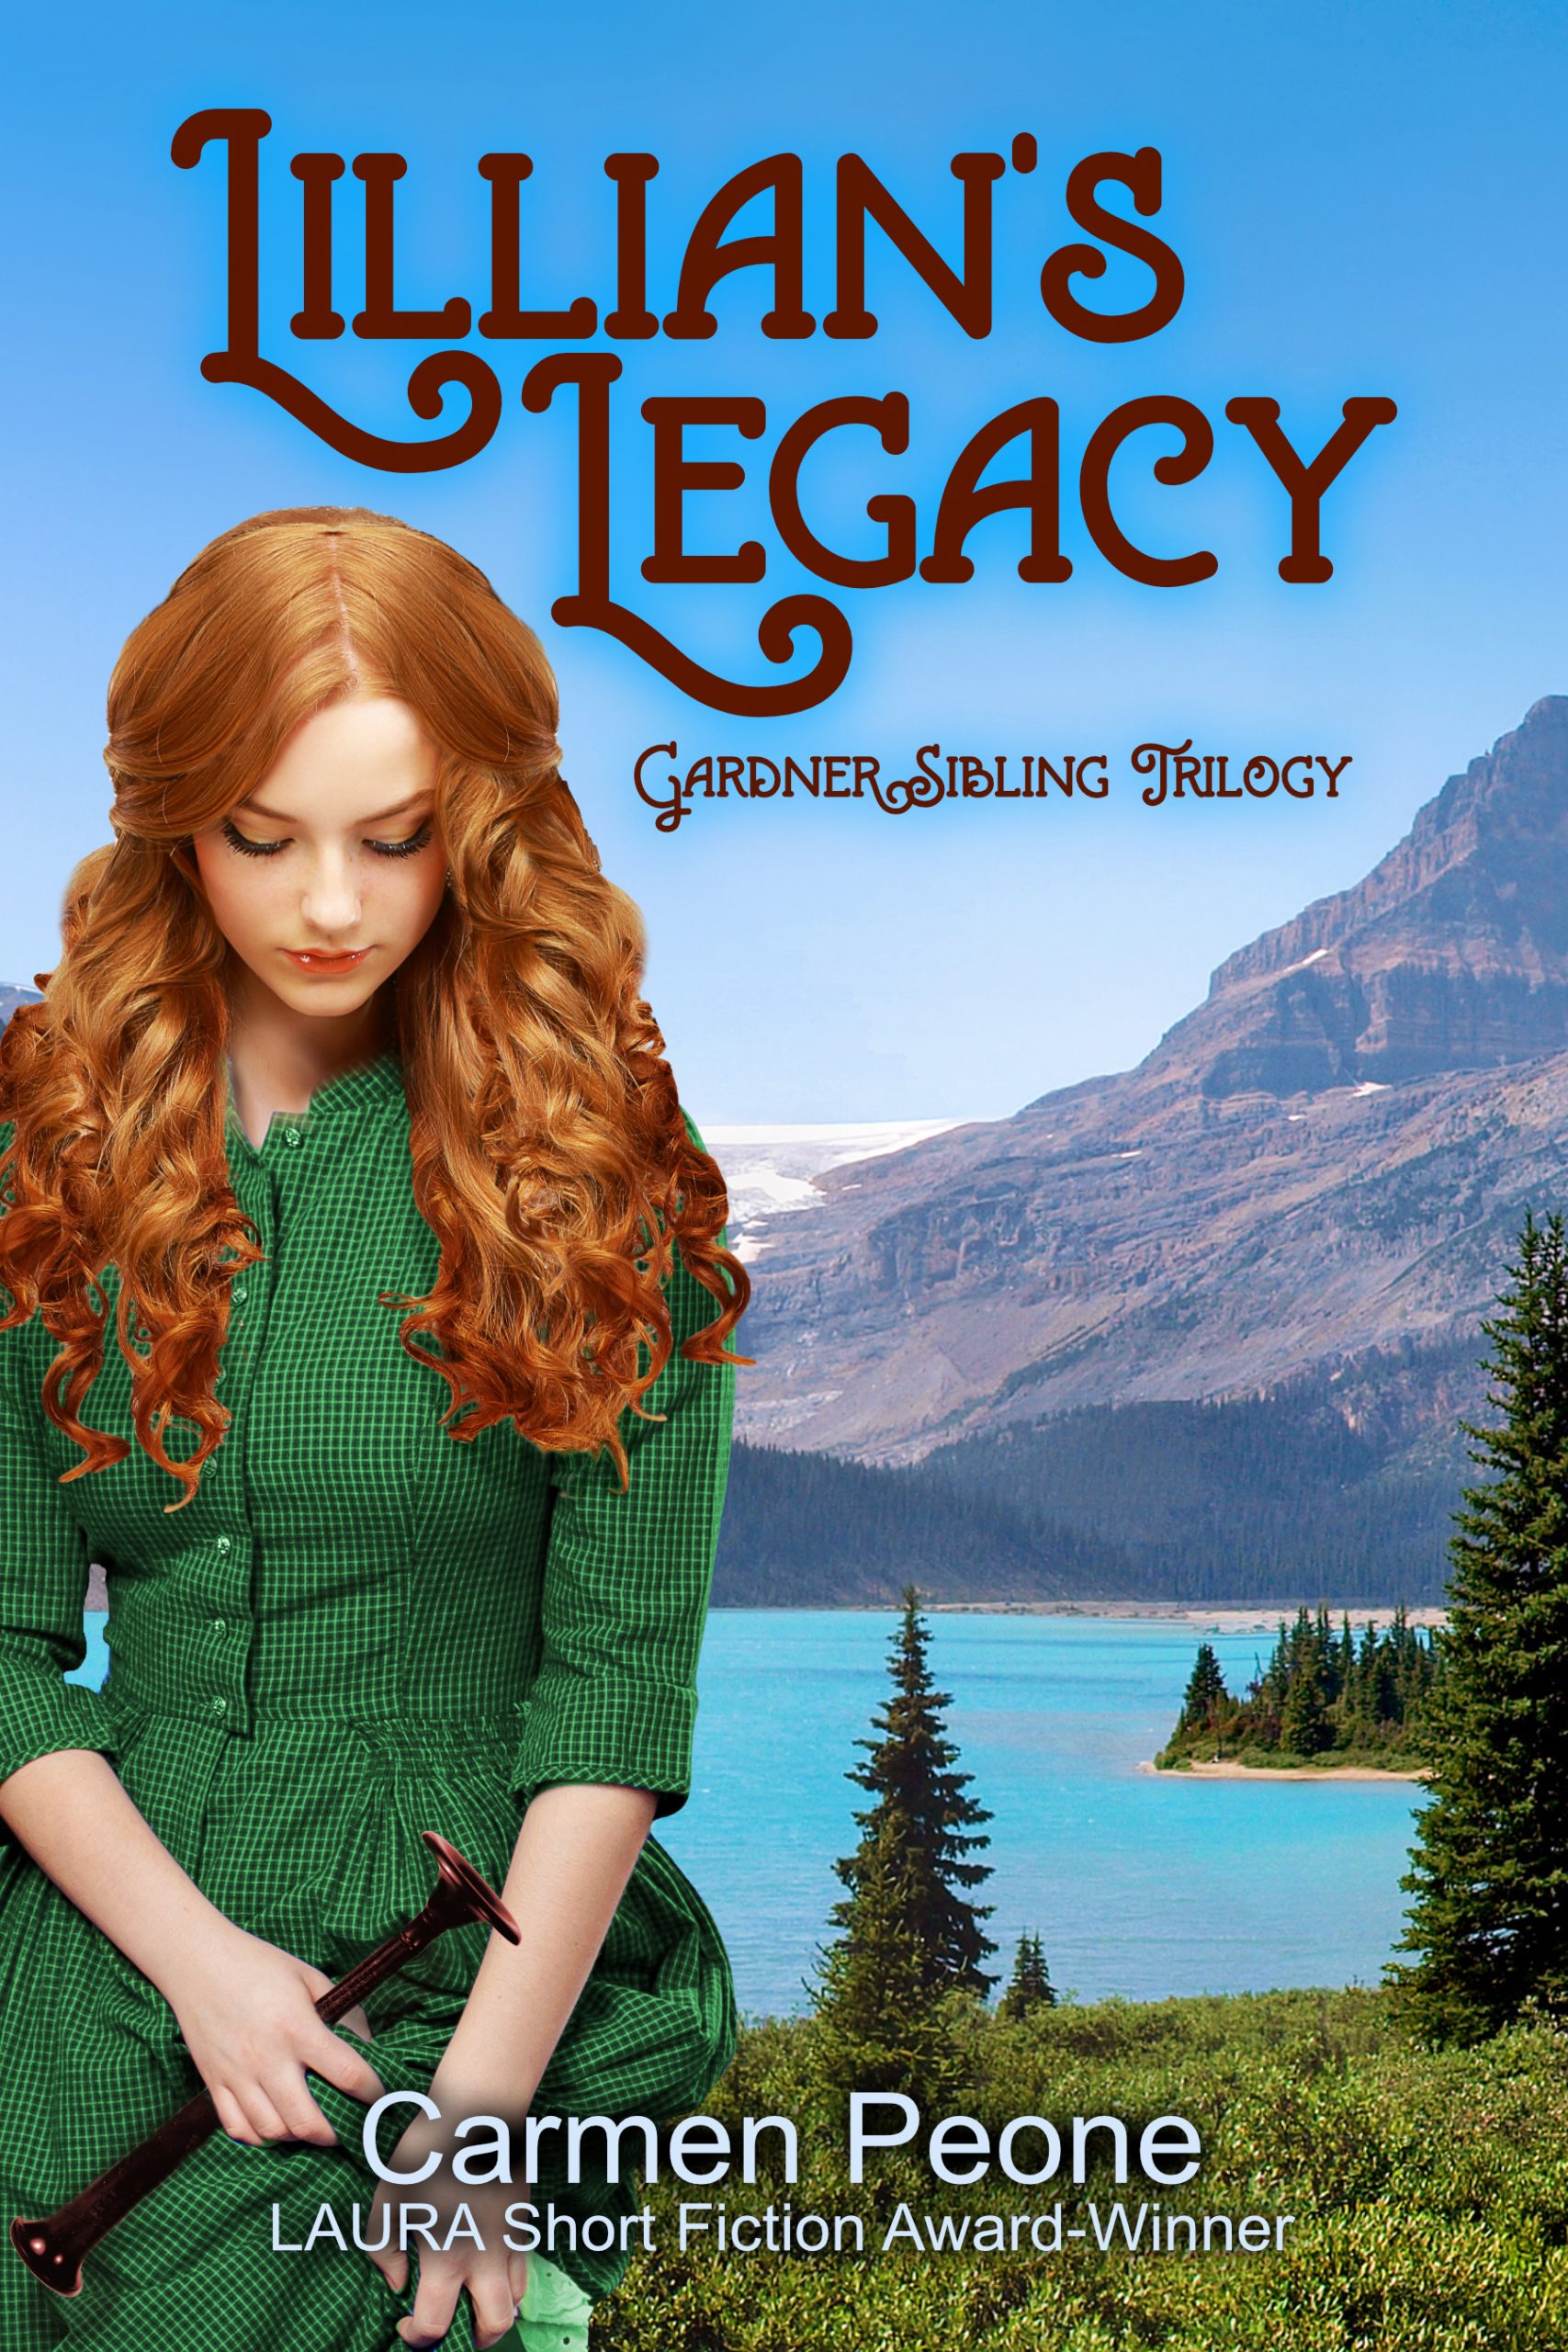 Welcome to Lillian’s Legacy Cover Reveal Party!